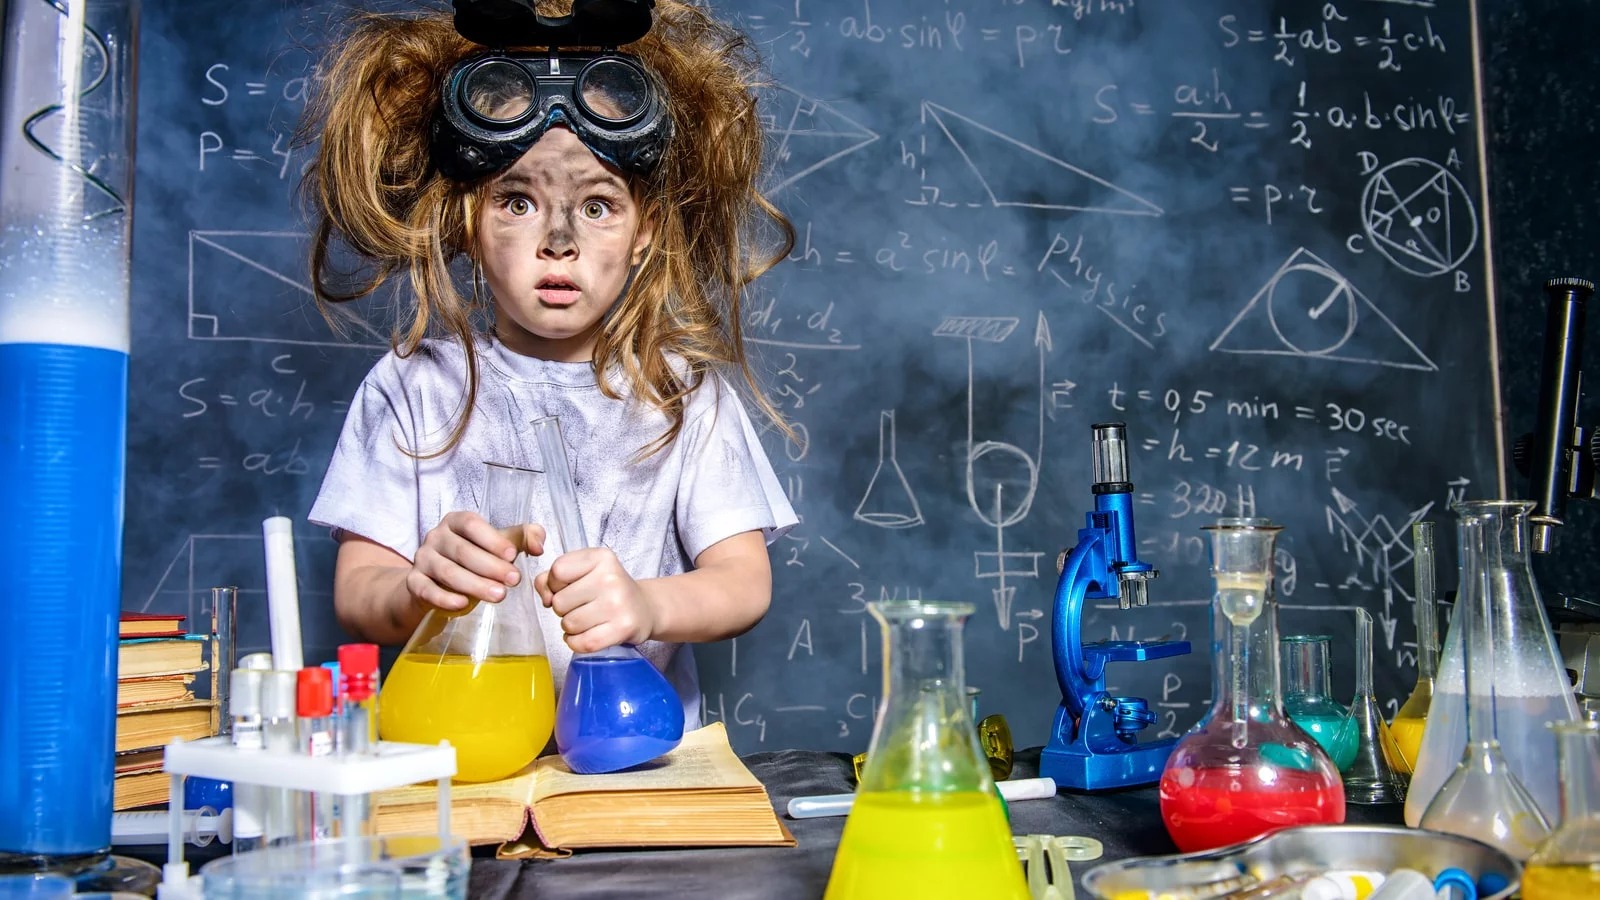 This Random Knowledge Quiz Is 20% Harder Than Most — Can You Pass It? Kid Child Science Chemistry Failure